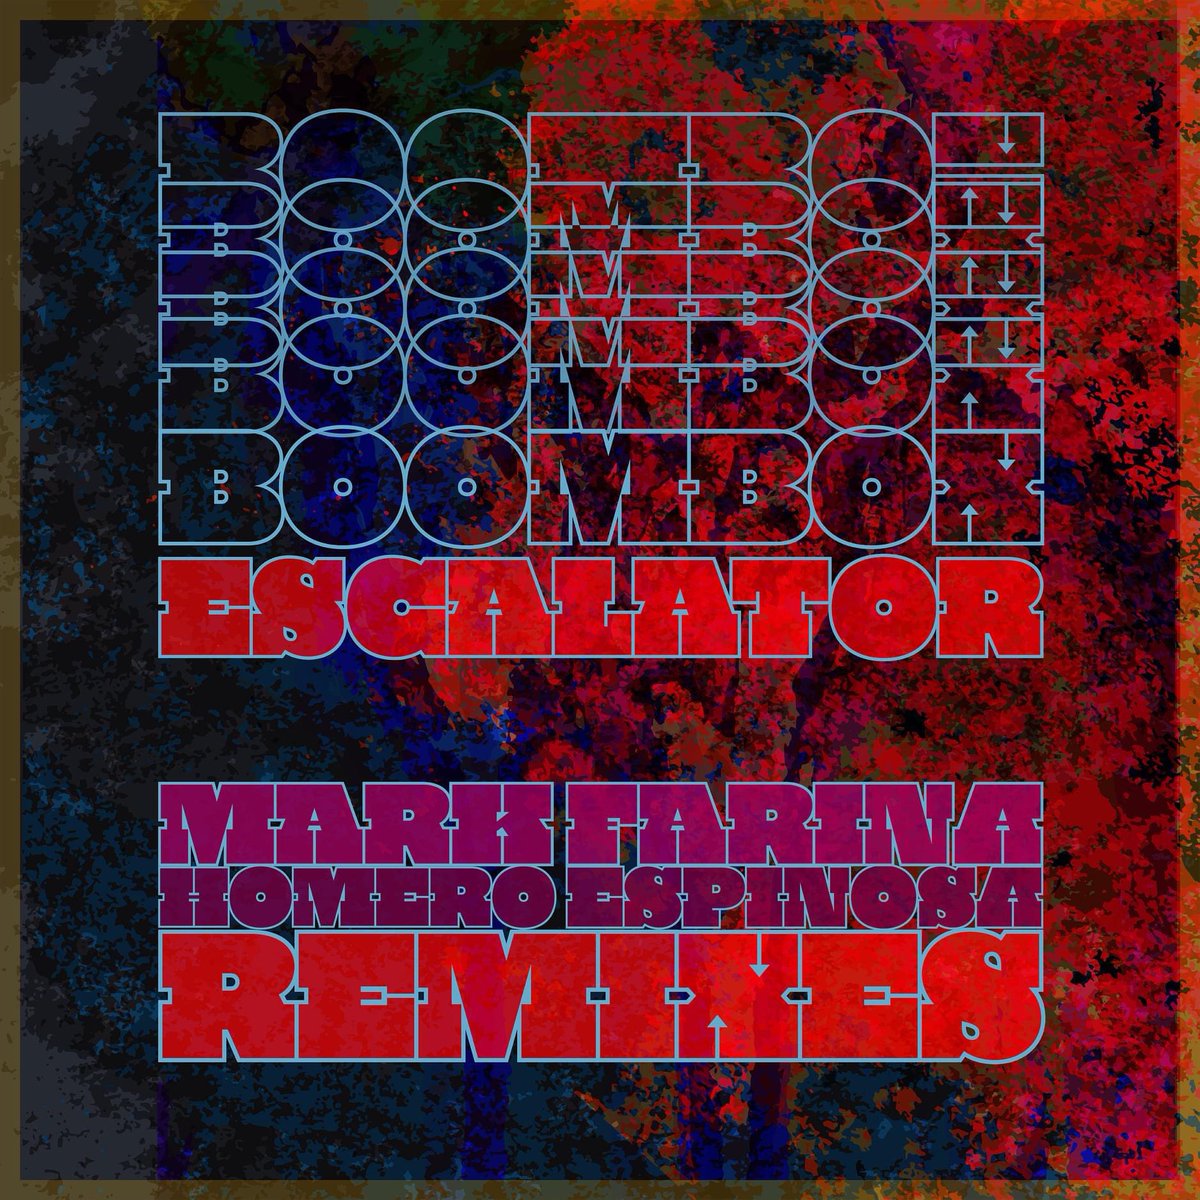 OUT NOW! @djmarkfarina and @homeroespinosa (Moulton Music) laid down some dope remixes of our newest single Escalator! Let us know which one is your favorite!